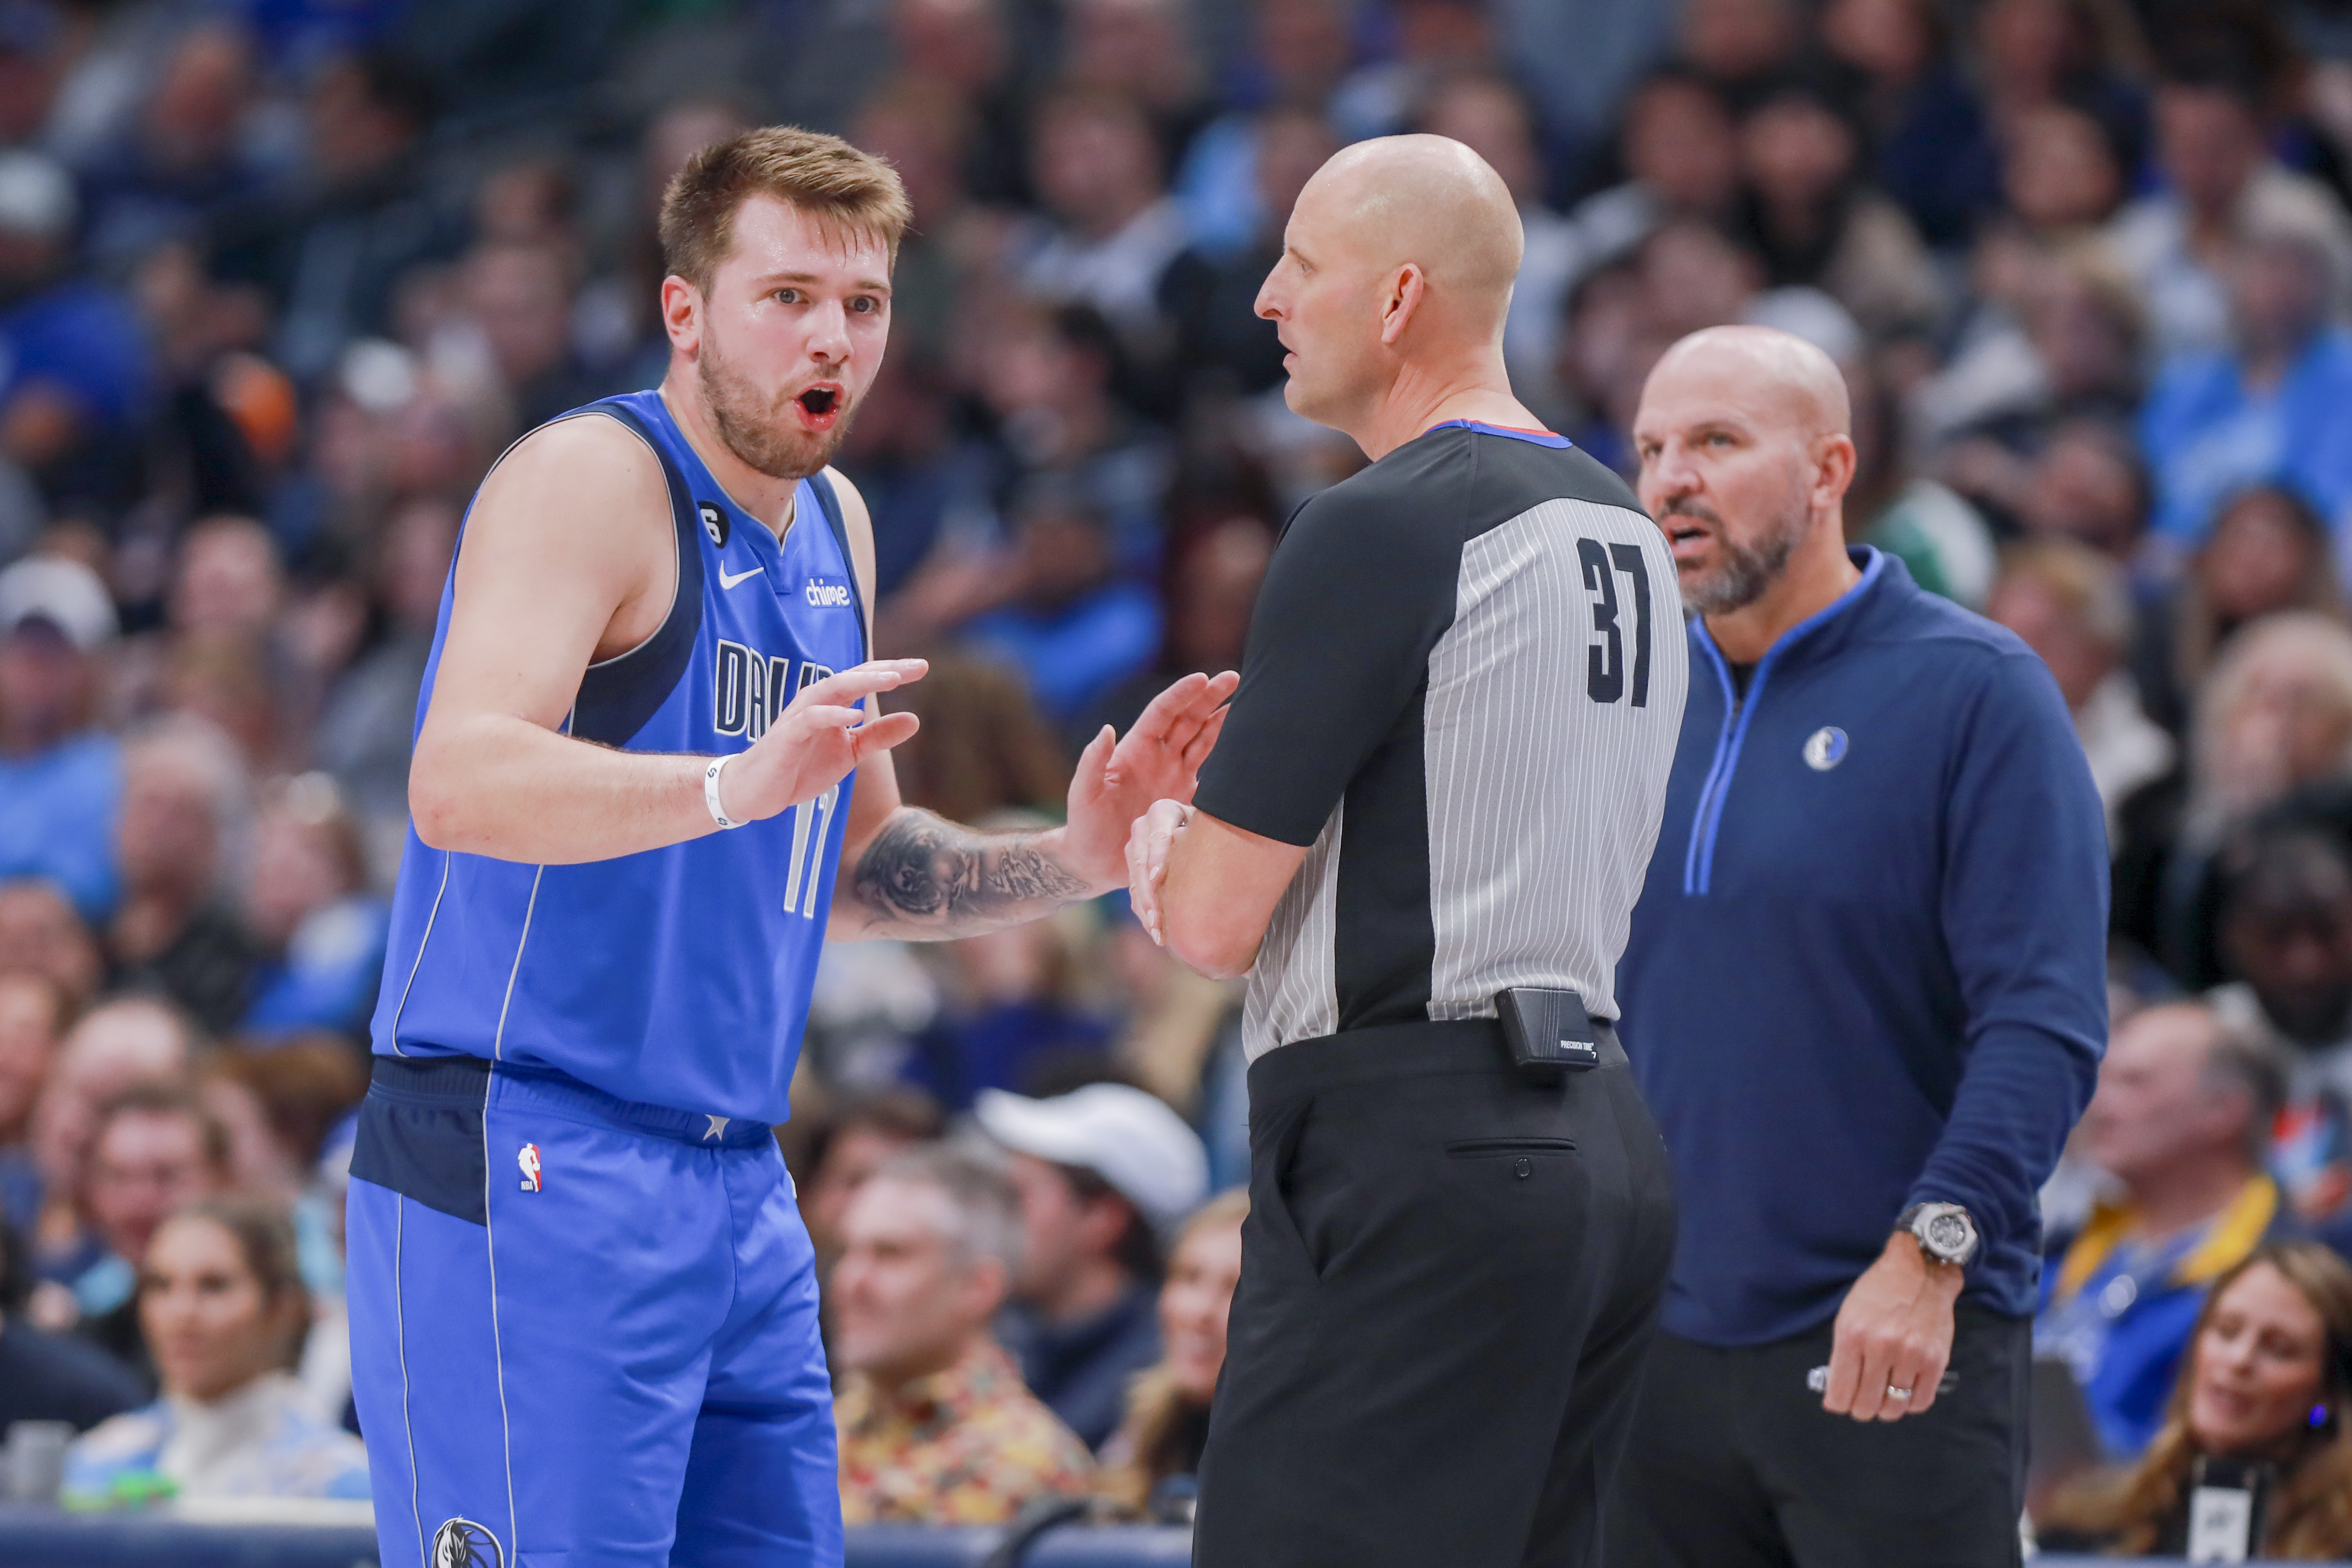 Jason Kidd reveals what needs to improve for Luka and Dallas to win big - A  to Z Sports